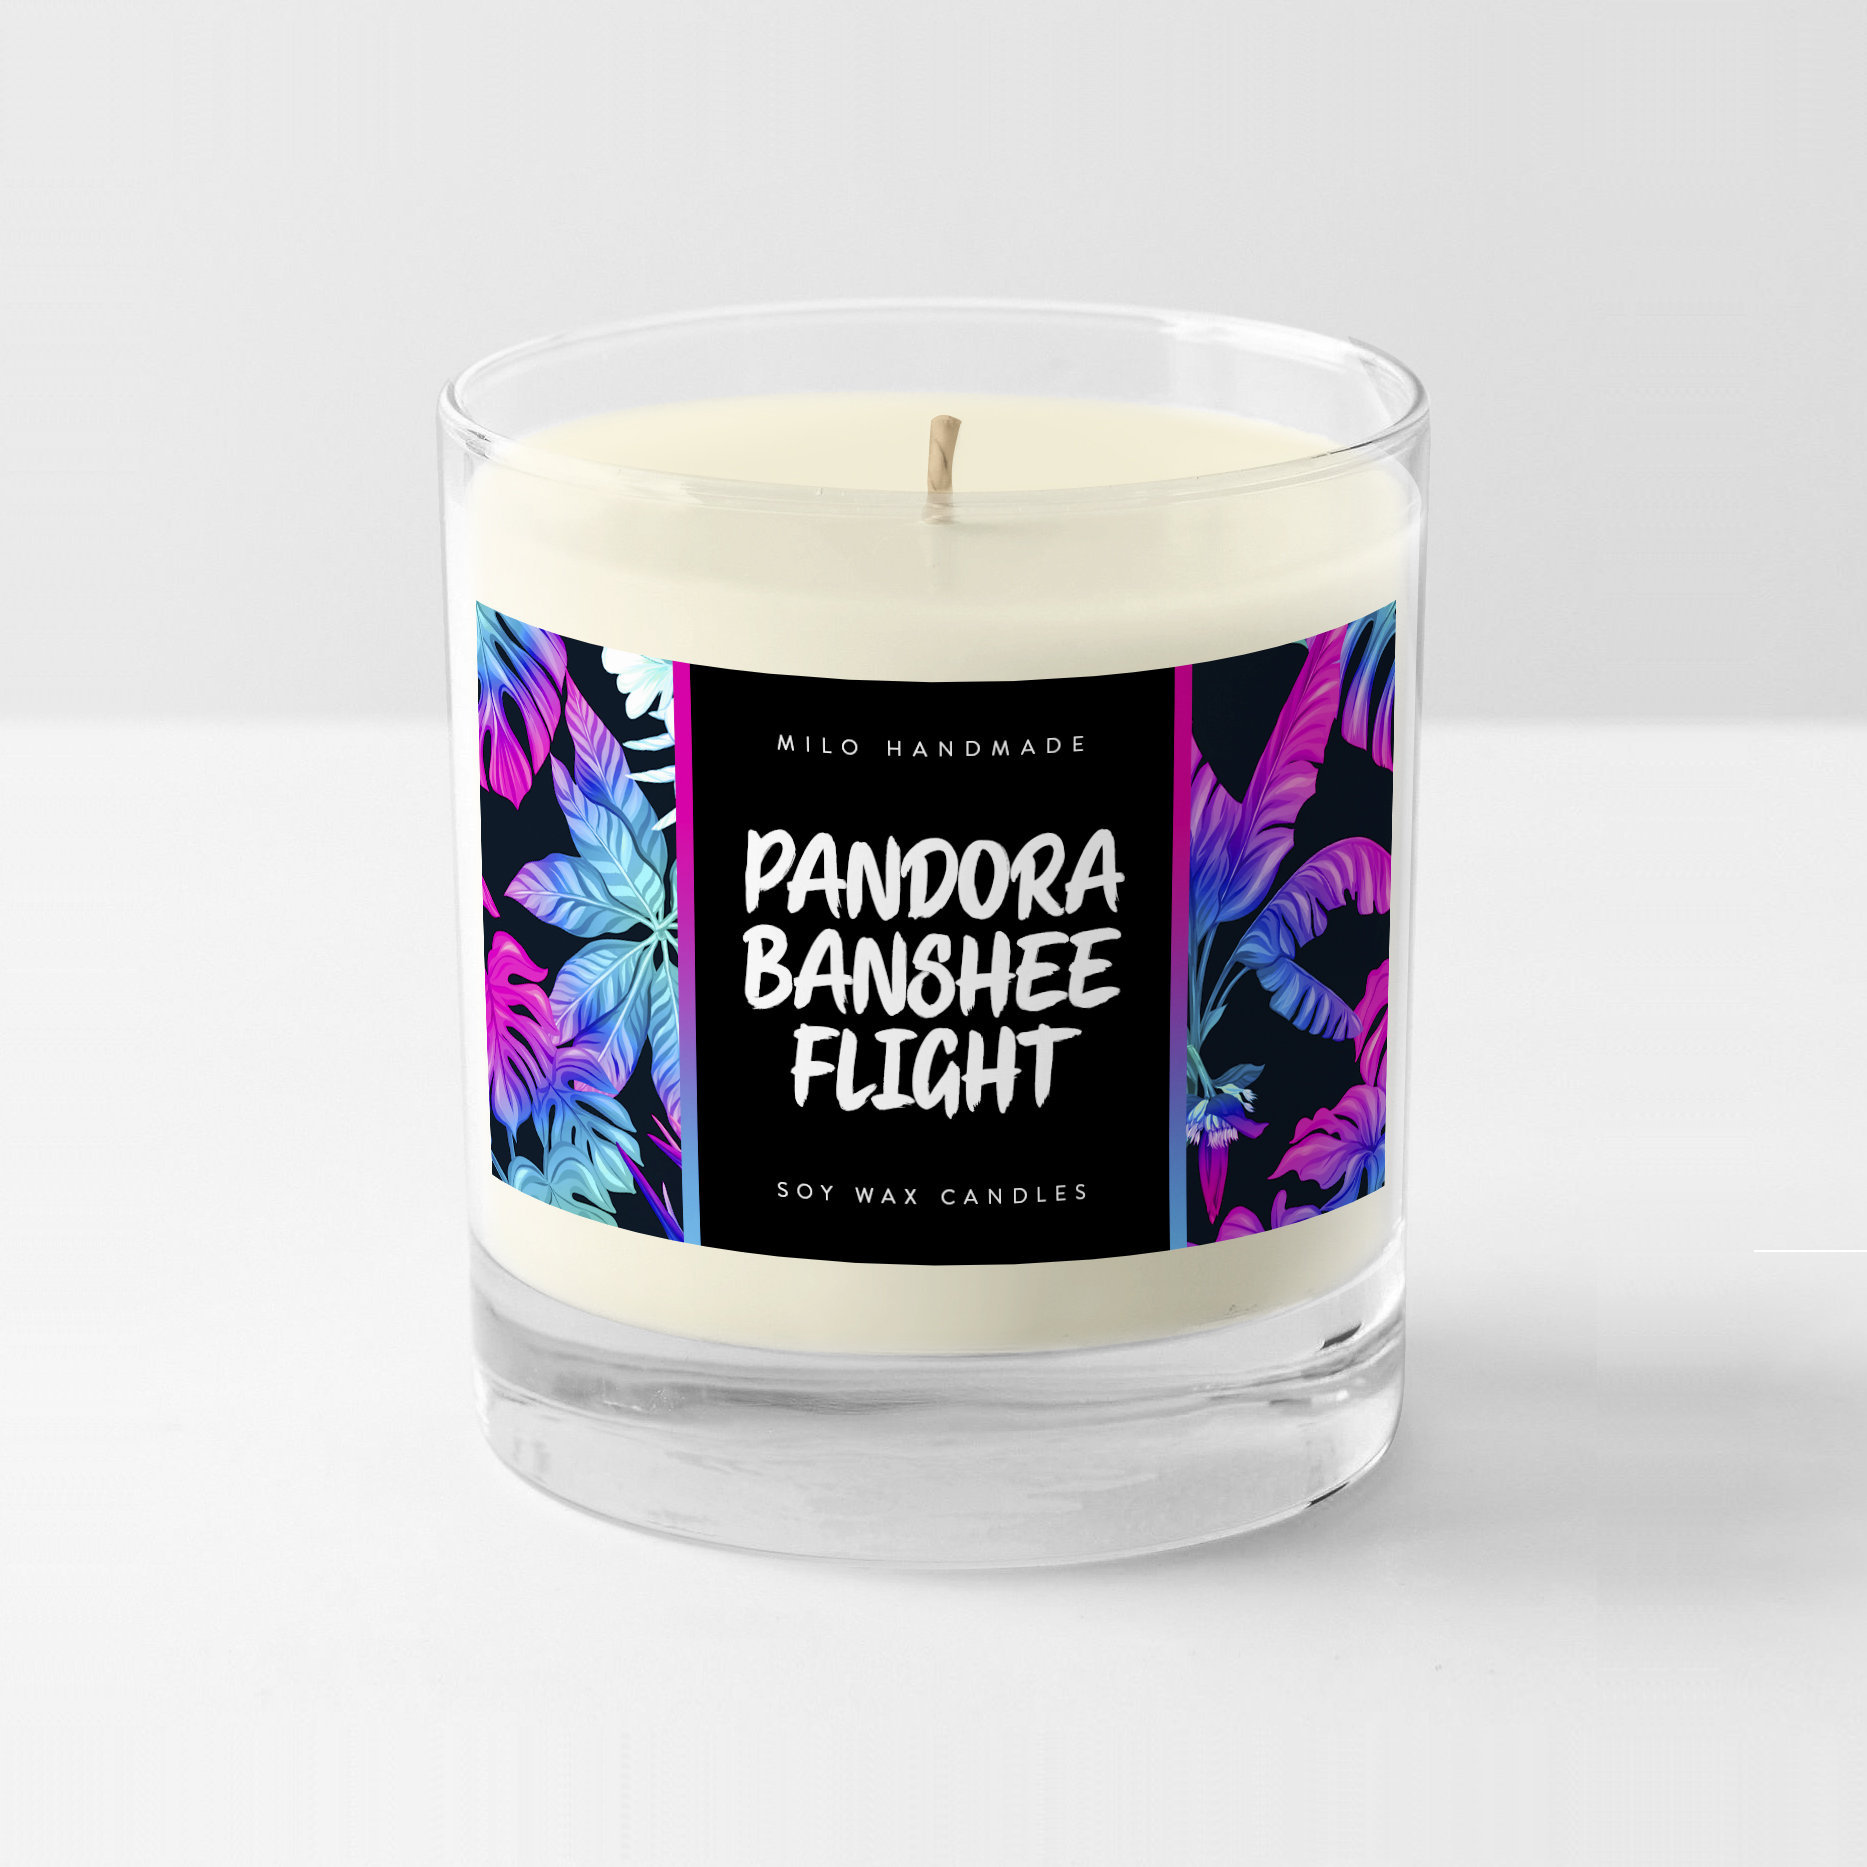 Park Scents Passage Flight Candle Super Accurate Smell of the Ocean Scene  in Flight of Passage Ride Handmade in the USA 